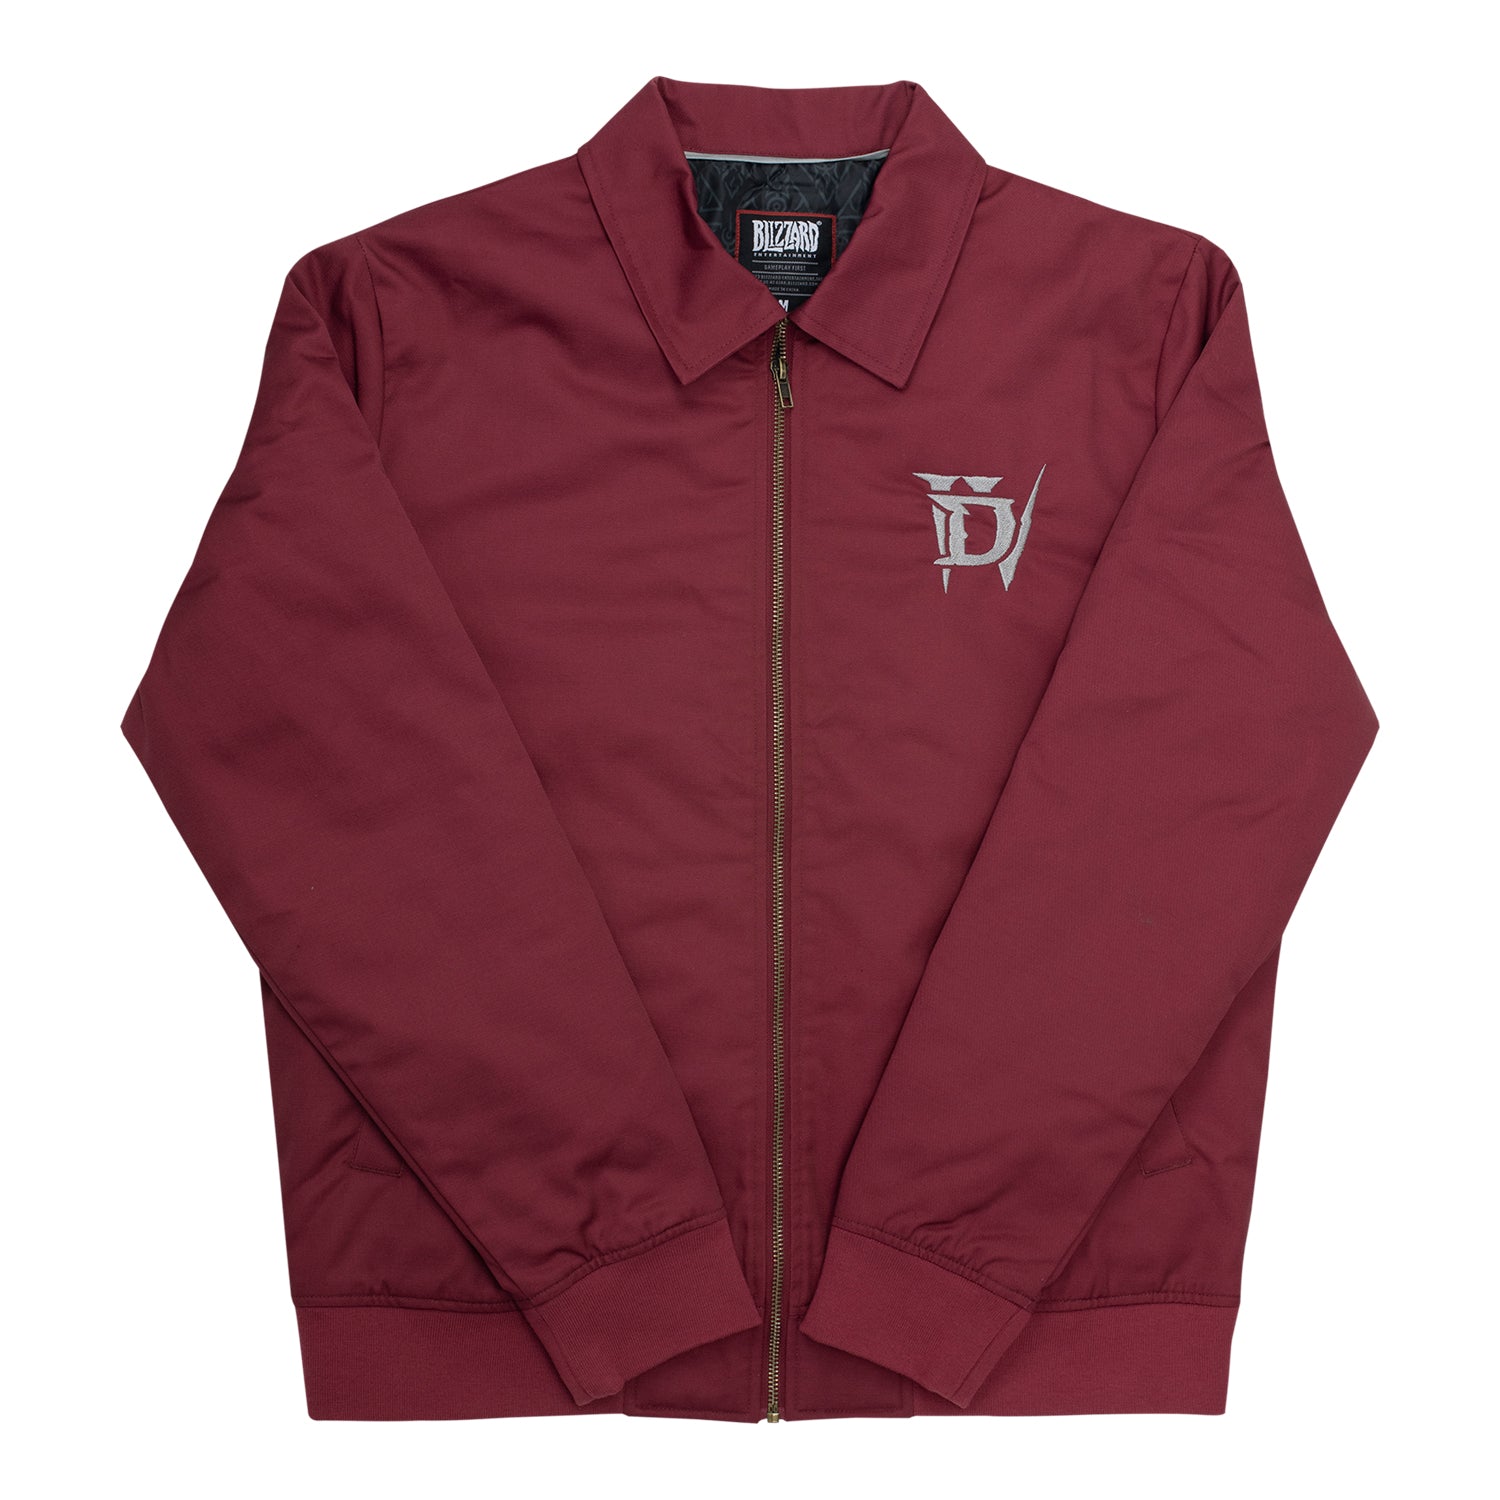 Diablo IV Red Work Jacket - Front View